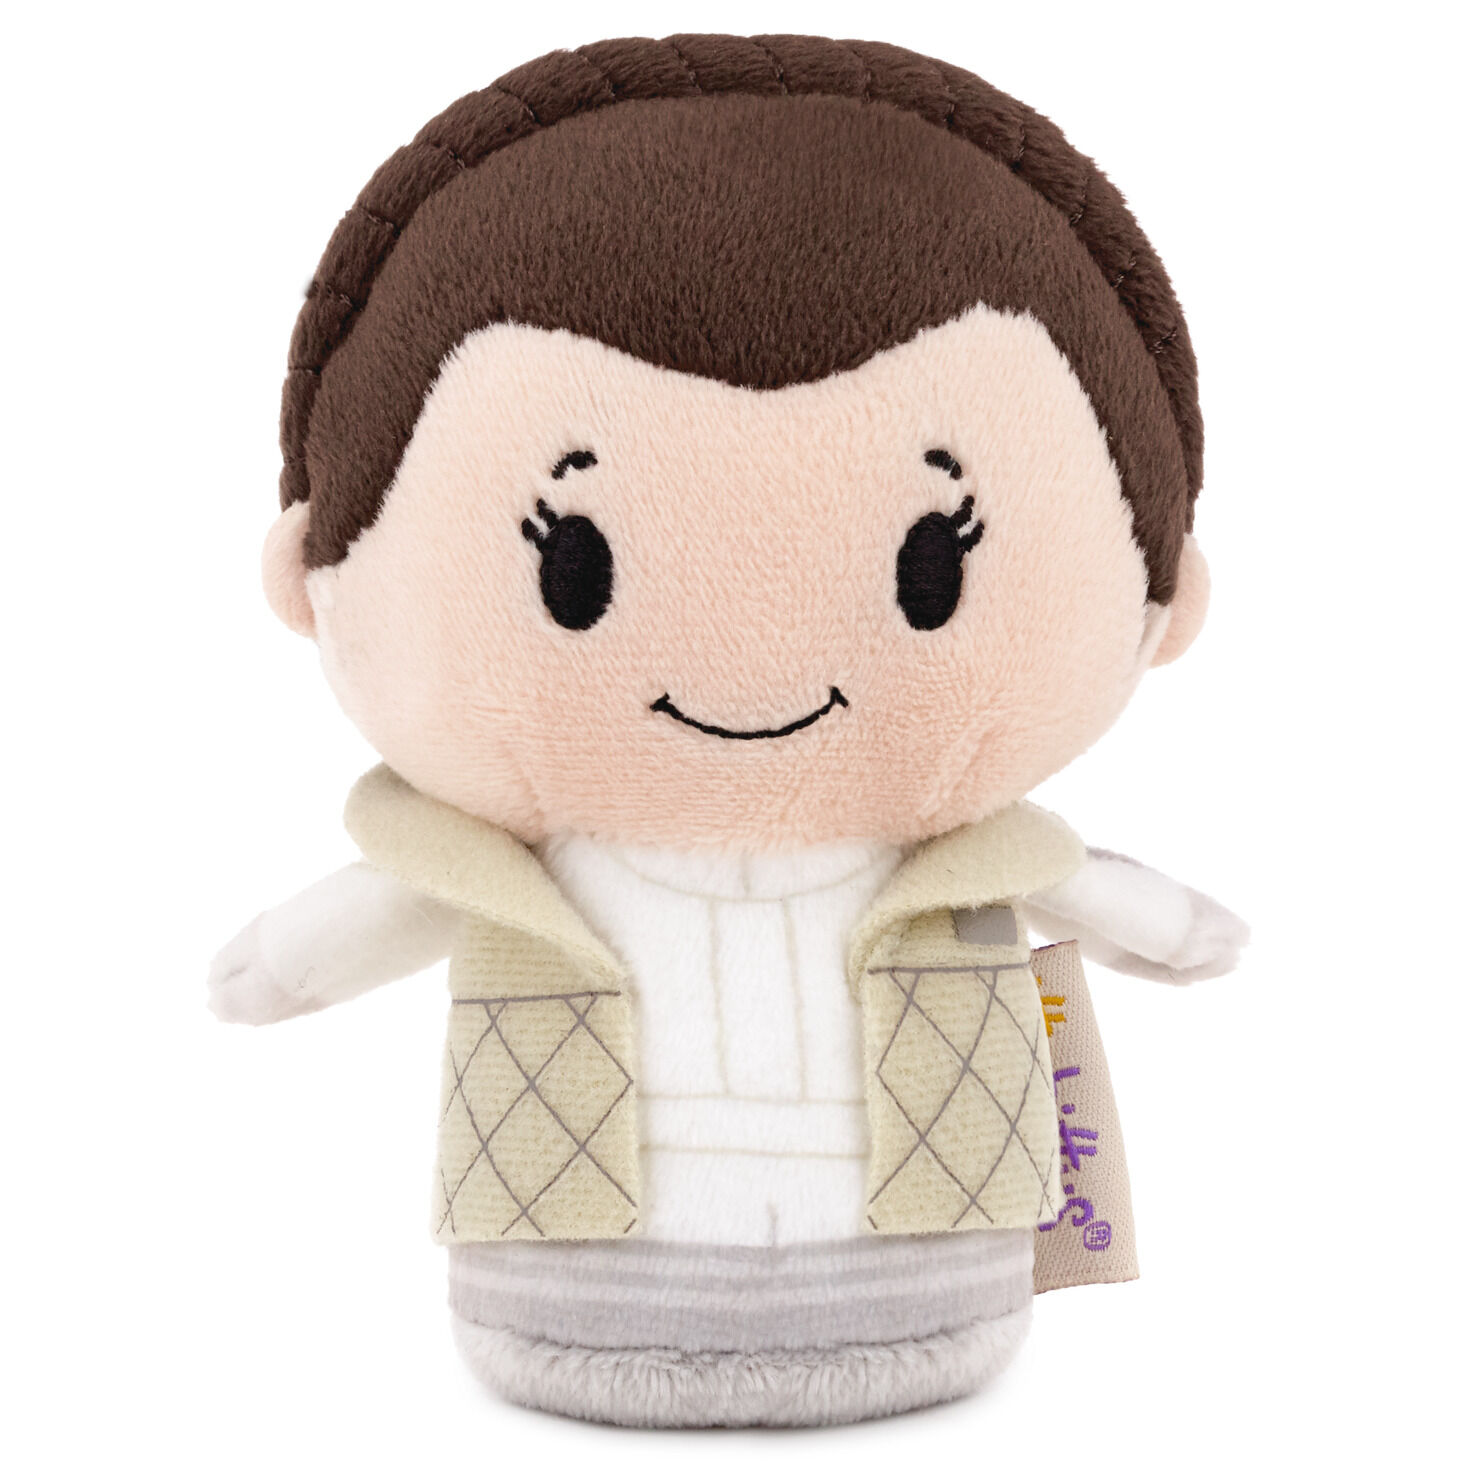 Itty Bittys Star Wars Princess Leia Organa In Hoth Outfit